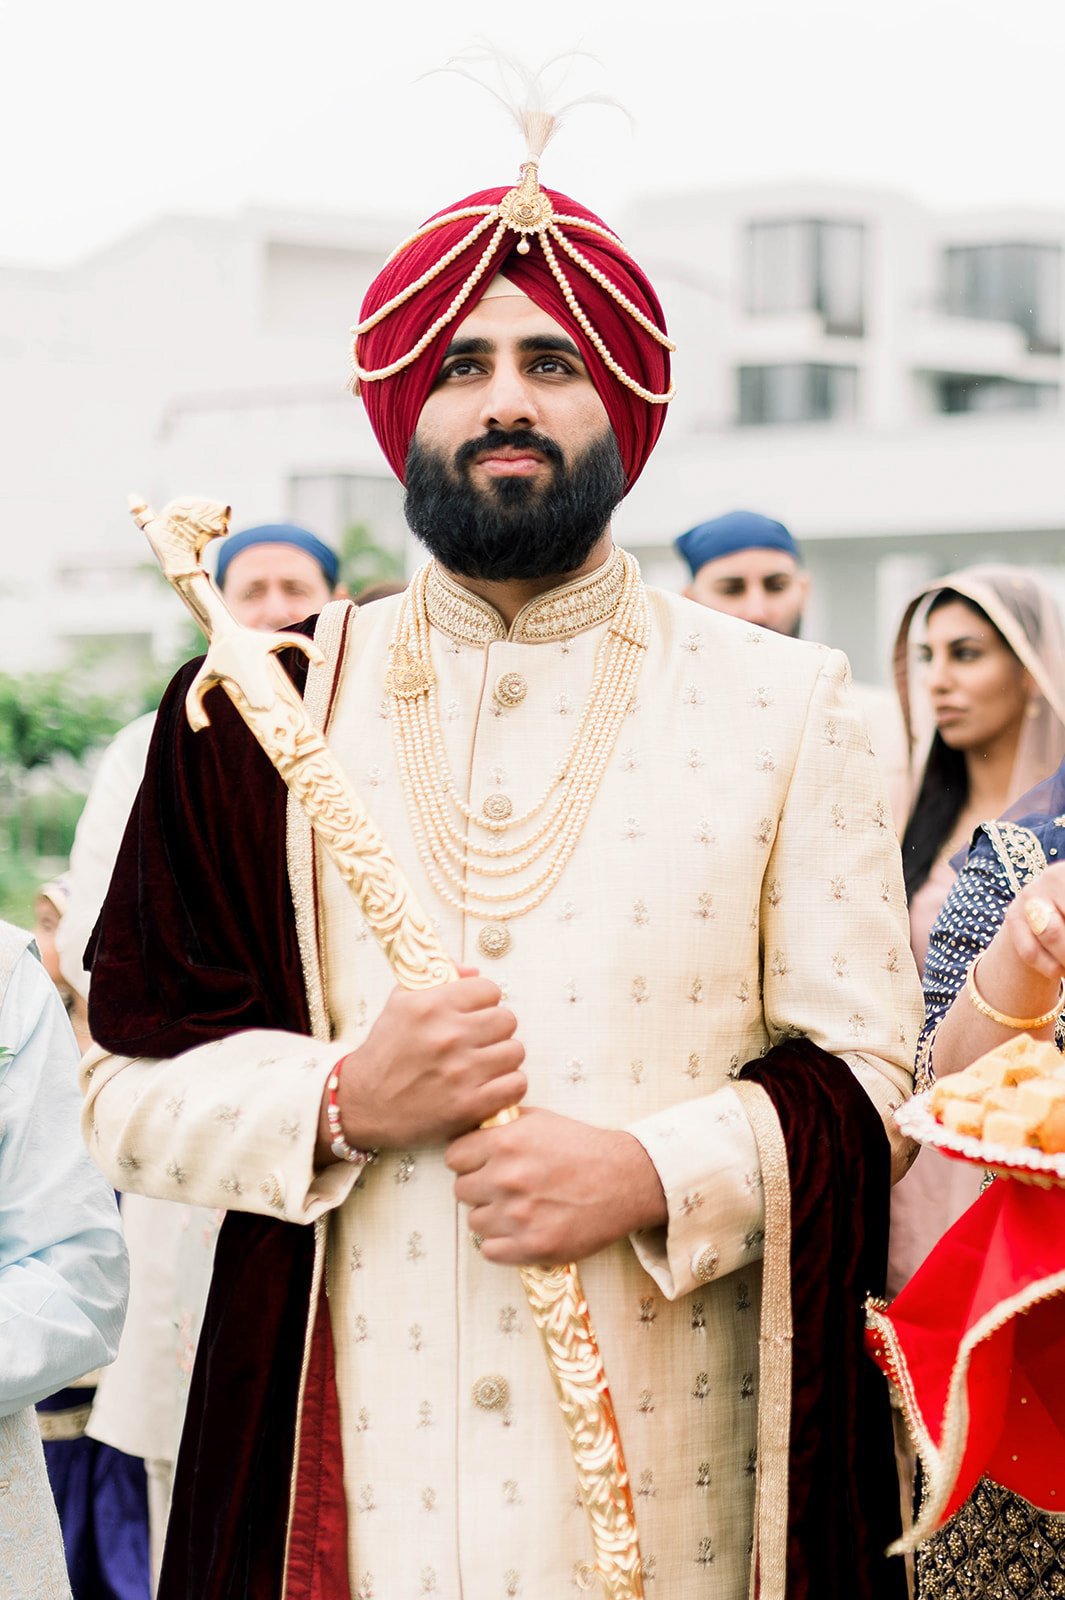 An Indian Groom clutches a sword as he enters the ceremony venue in Victoria BC